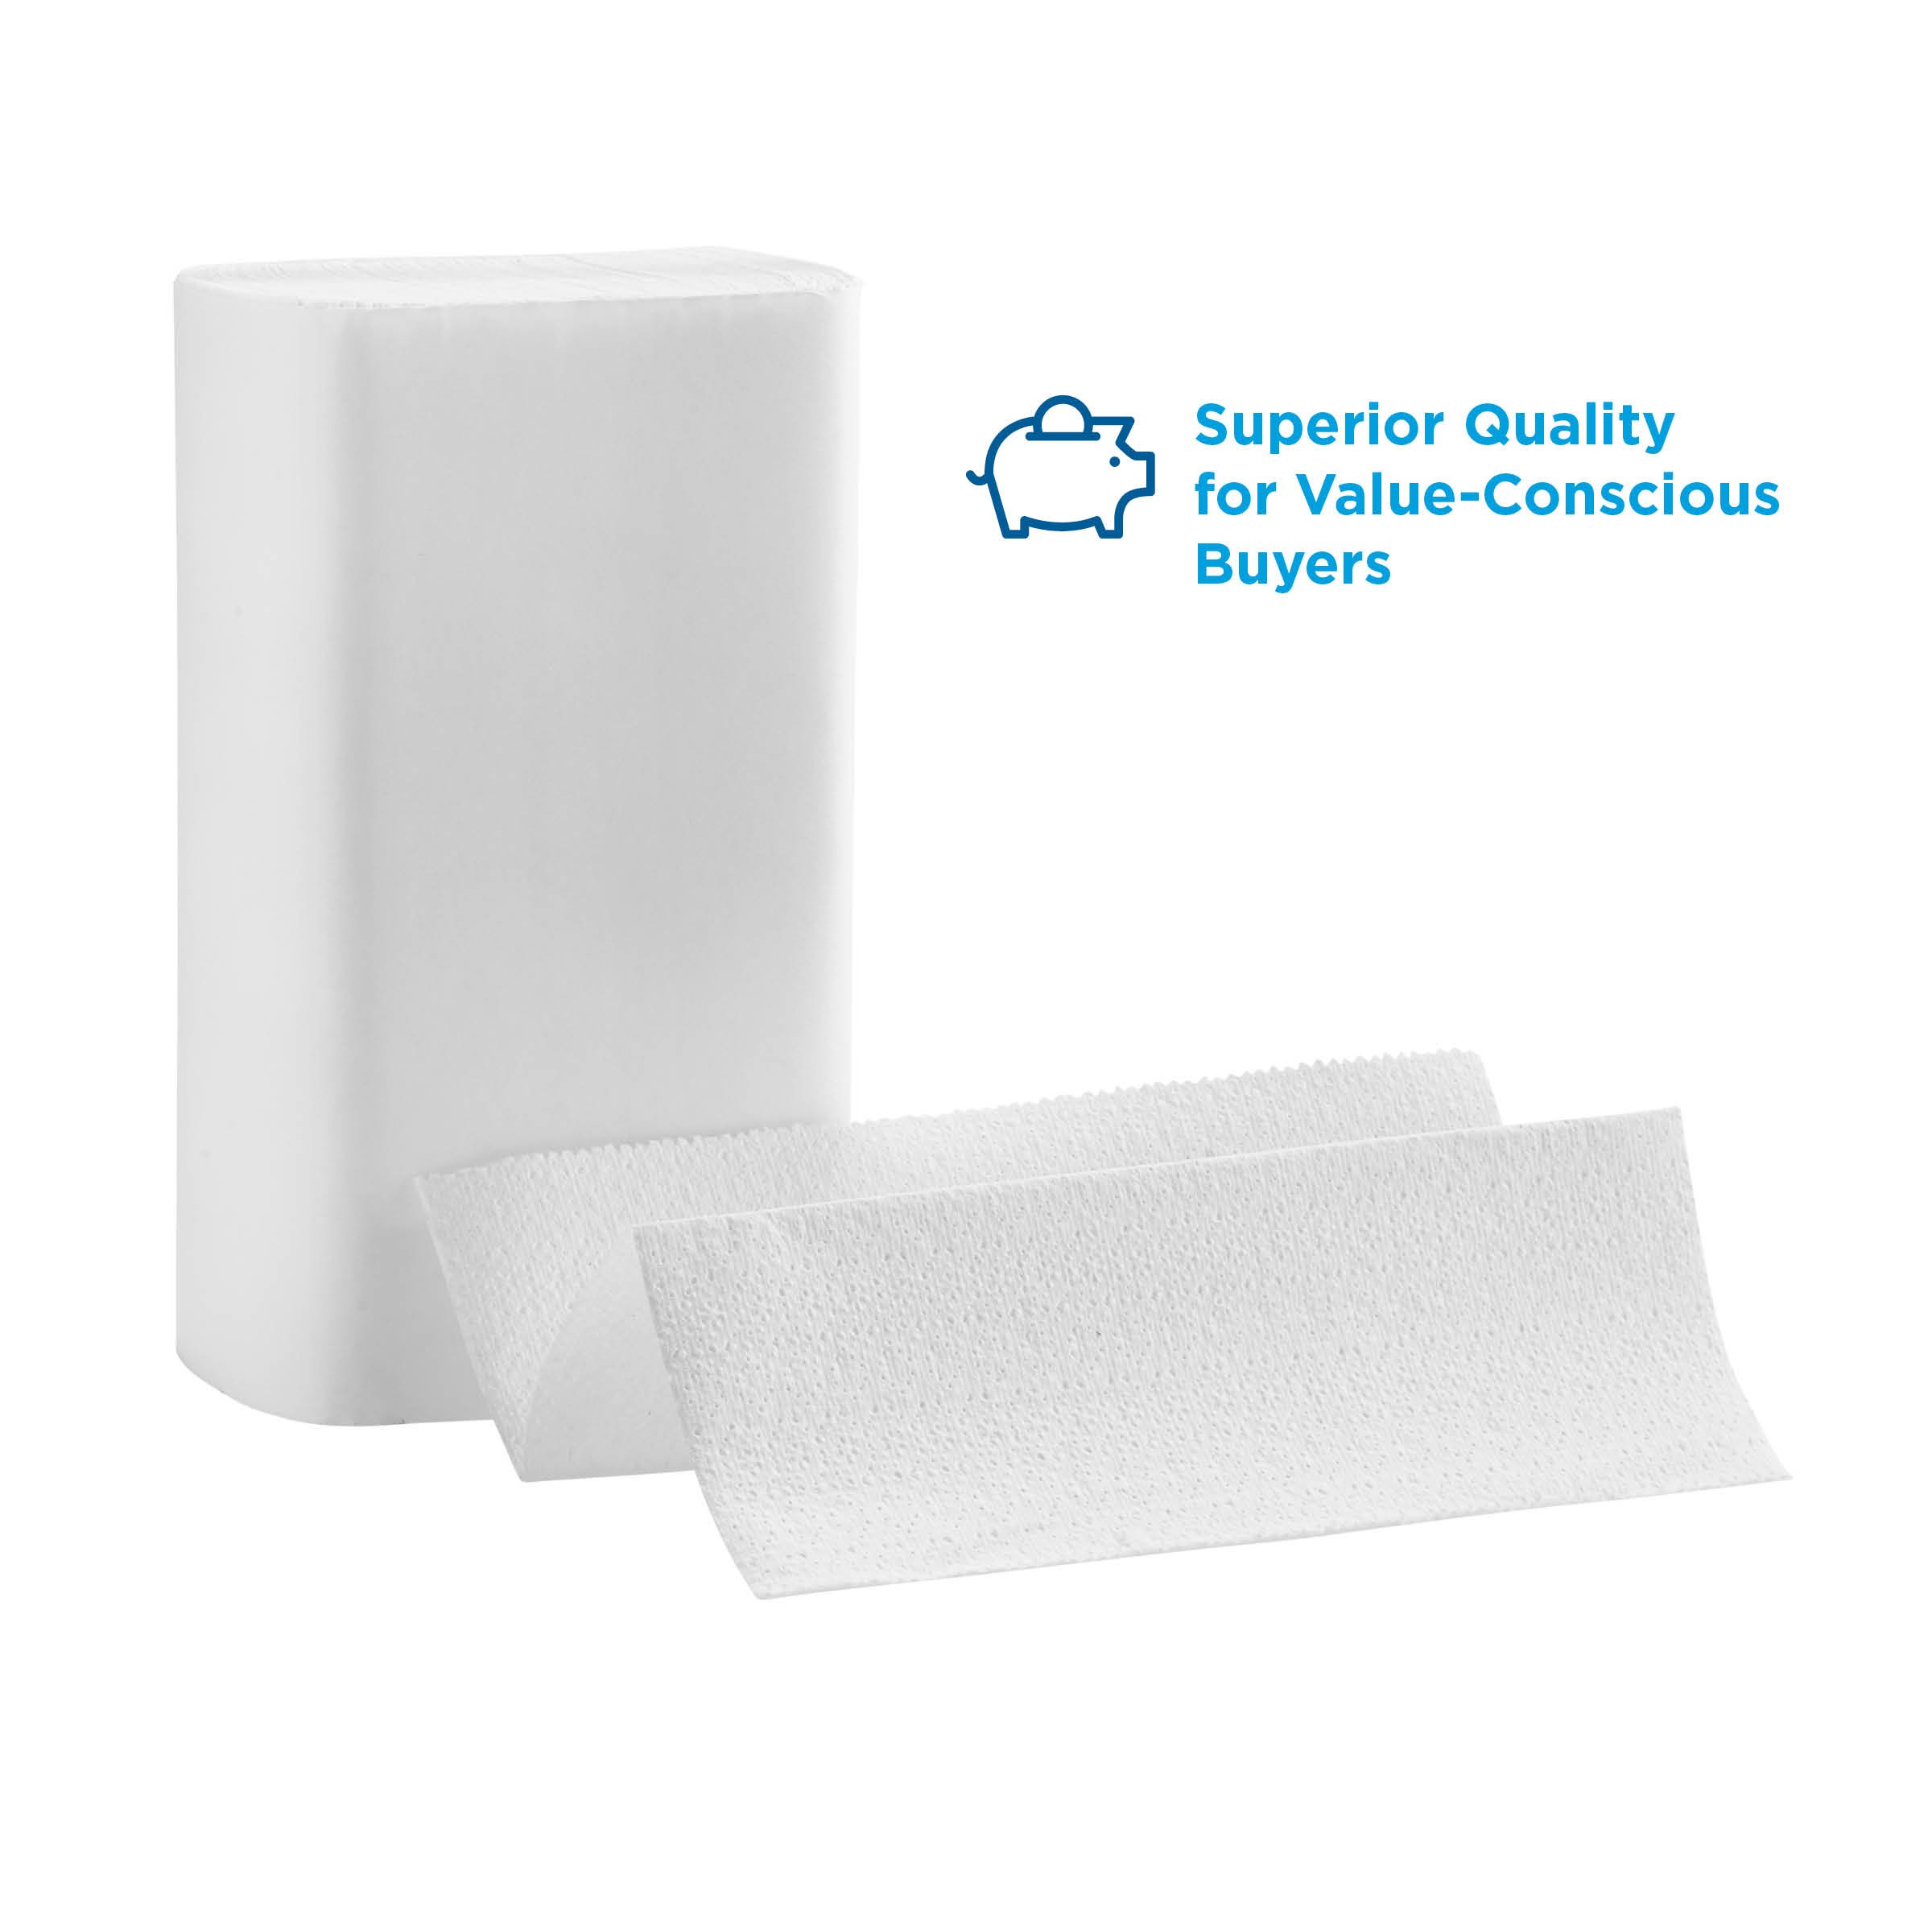 Pacific Blue Select Multifold Premium 2-Ply Paper Towels by GP PRO (Georgia-Pacific); White; 21000; 125 Paper Towels Per Pack; 16 Packs Per Case